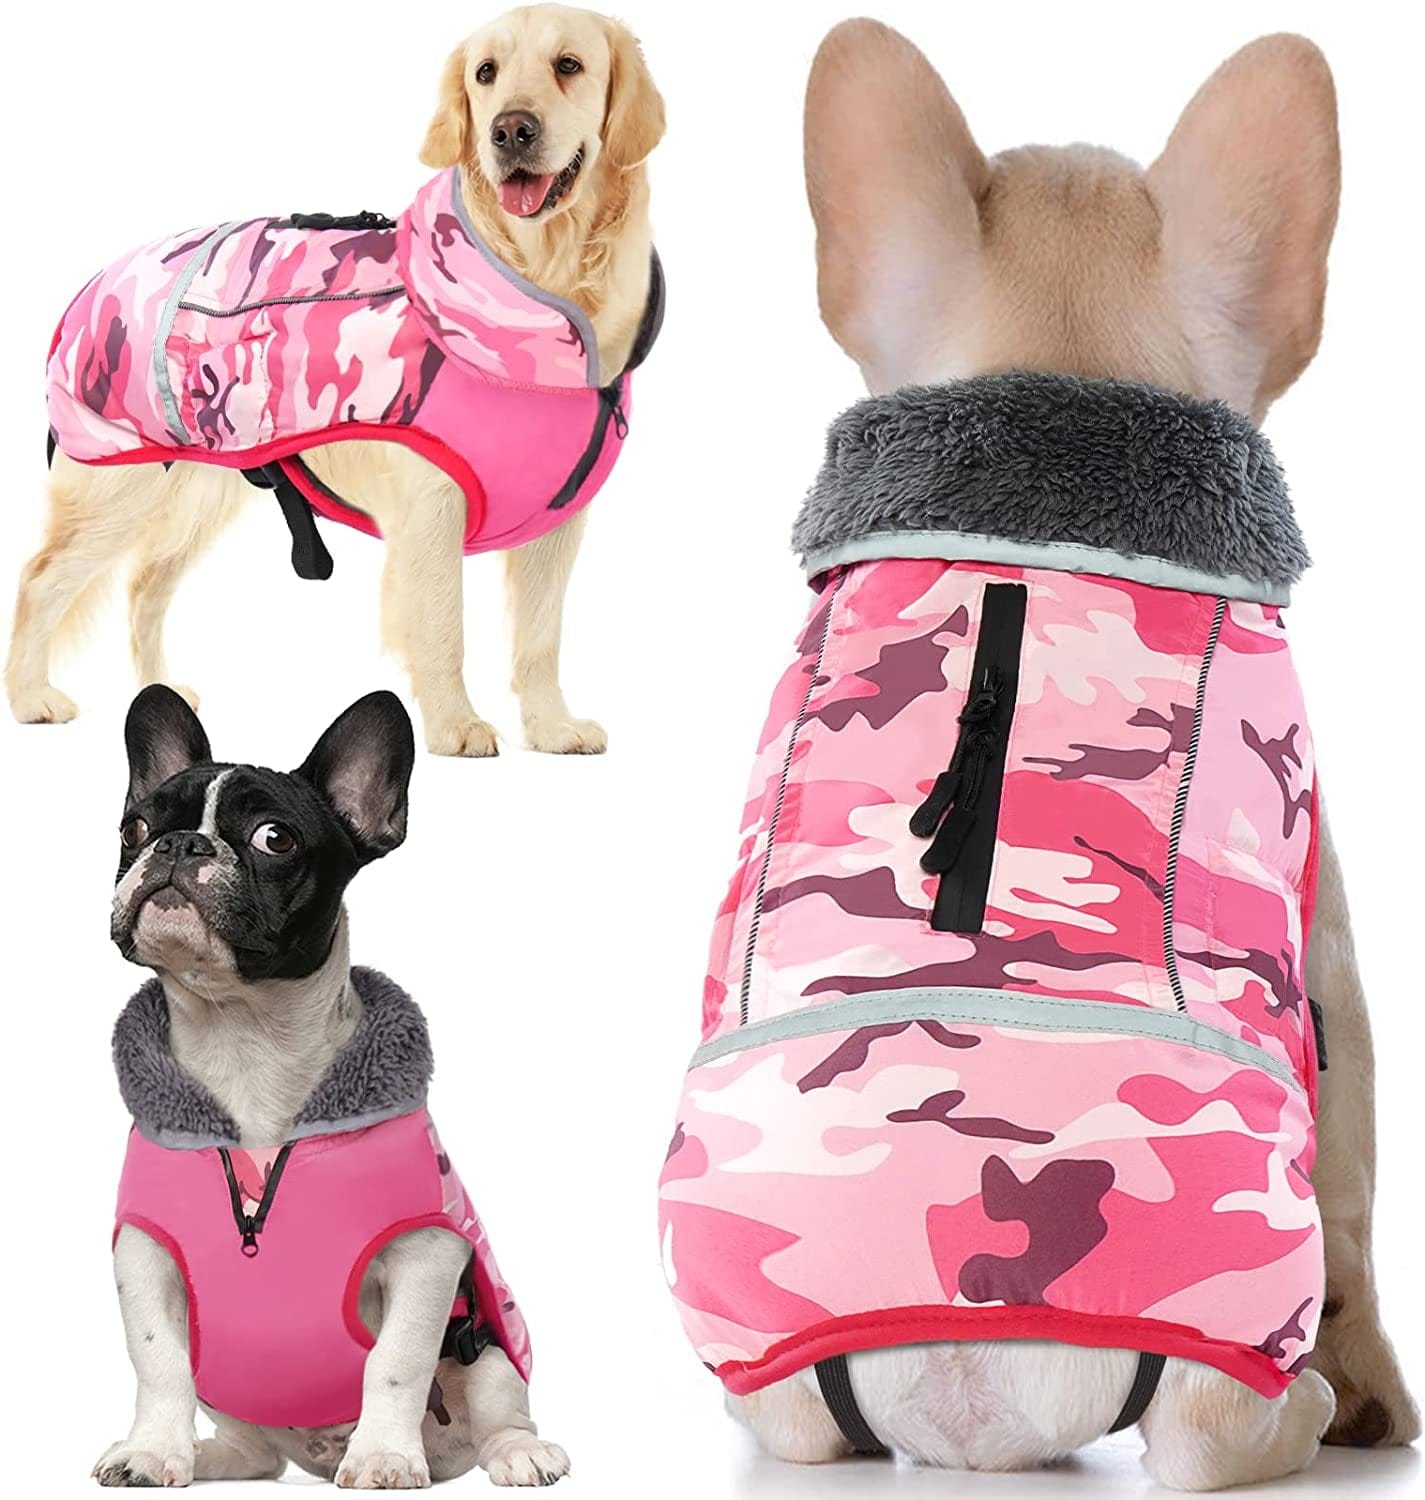 Dropship Dog Coats Small Waterproof,Warm Outfit Clothes Dog Jackets Small,Adjustable  Drawstring Warm And Cozy Dog Sport Vest-(Green Size L) to Sell Online at a  Lower Price